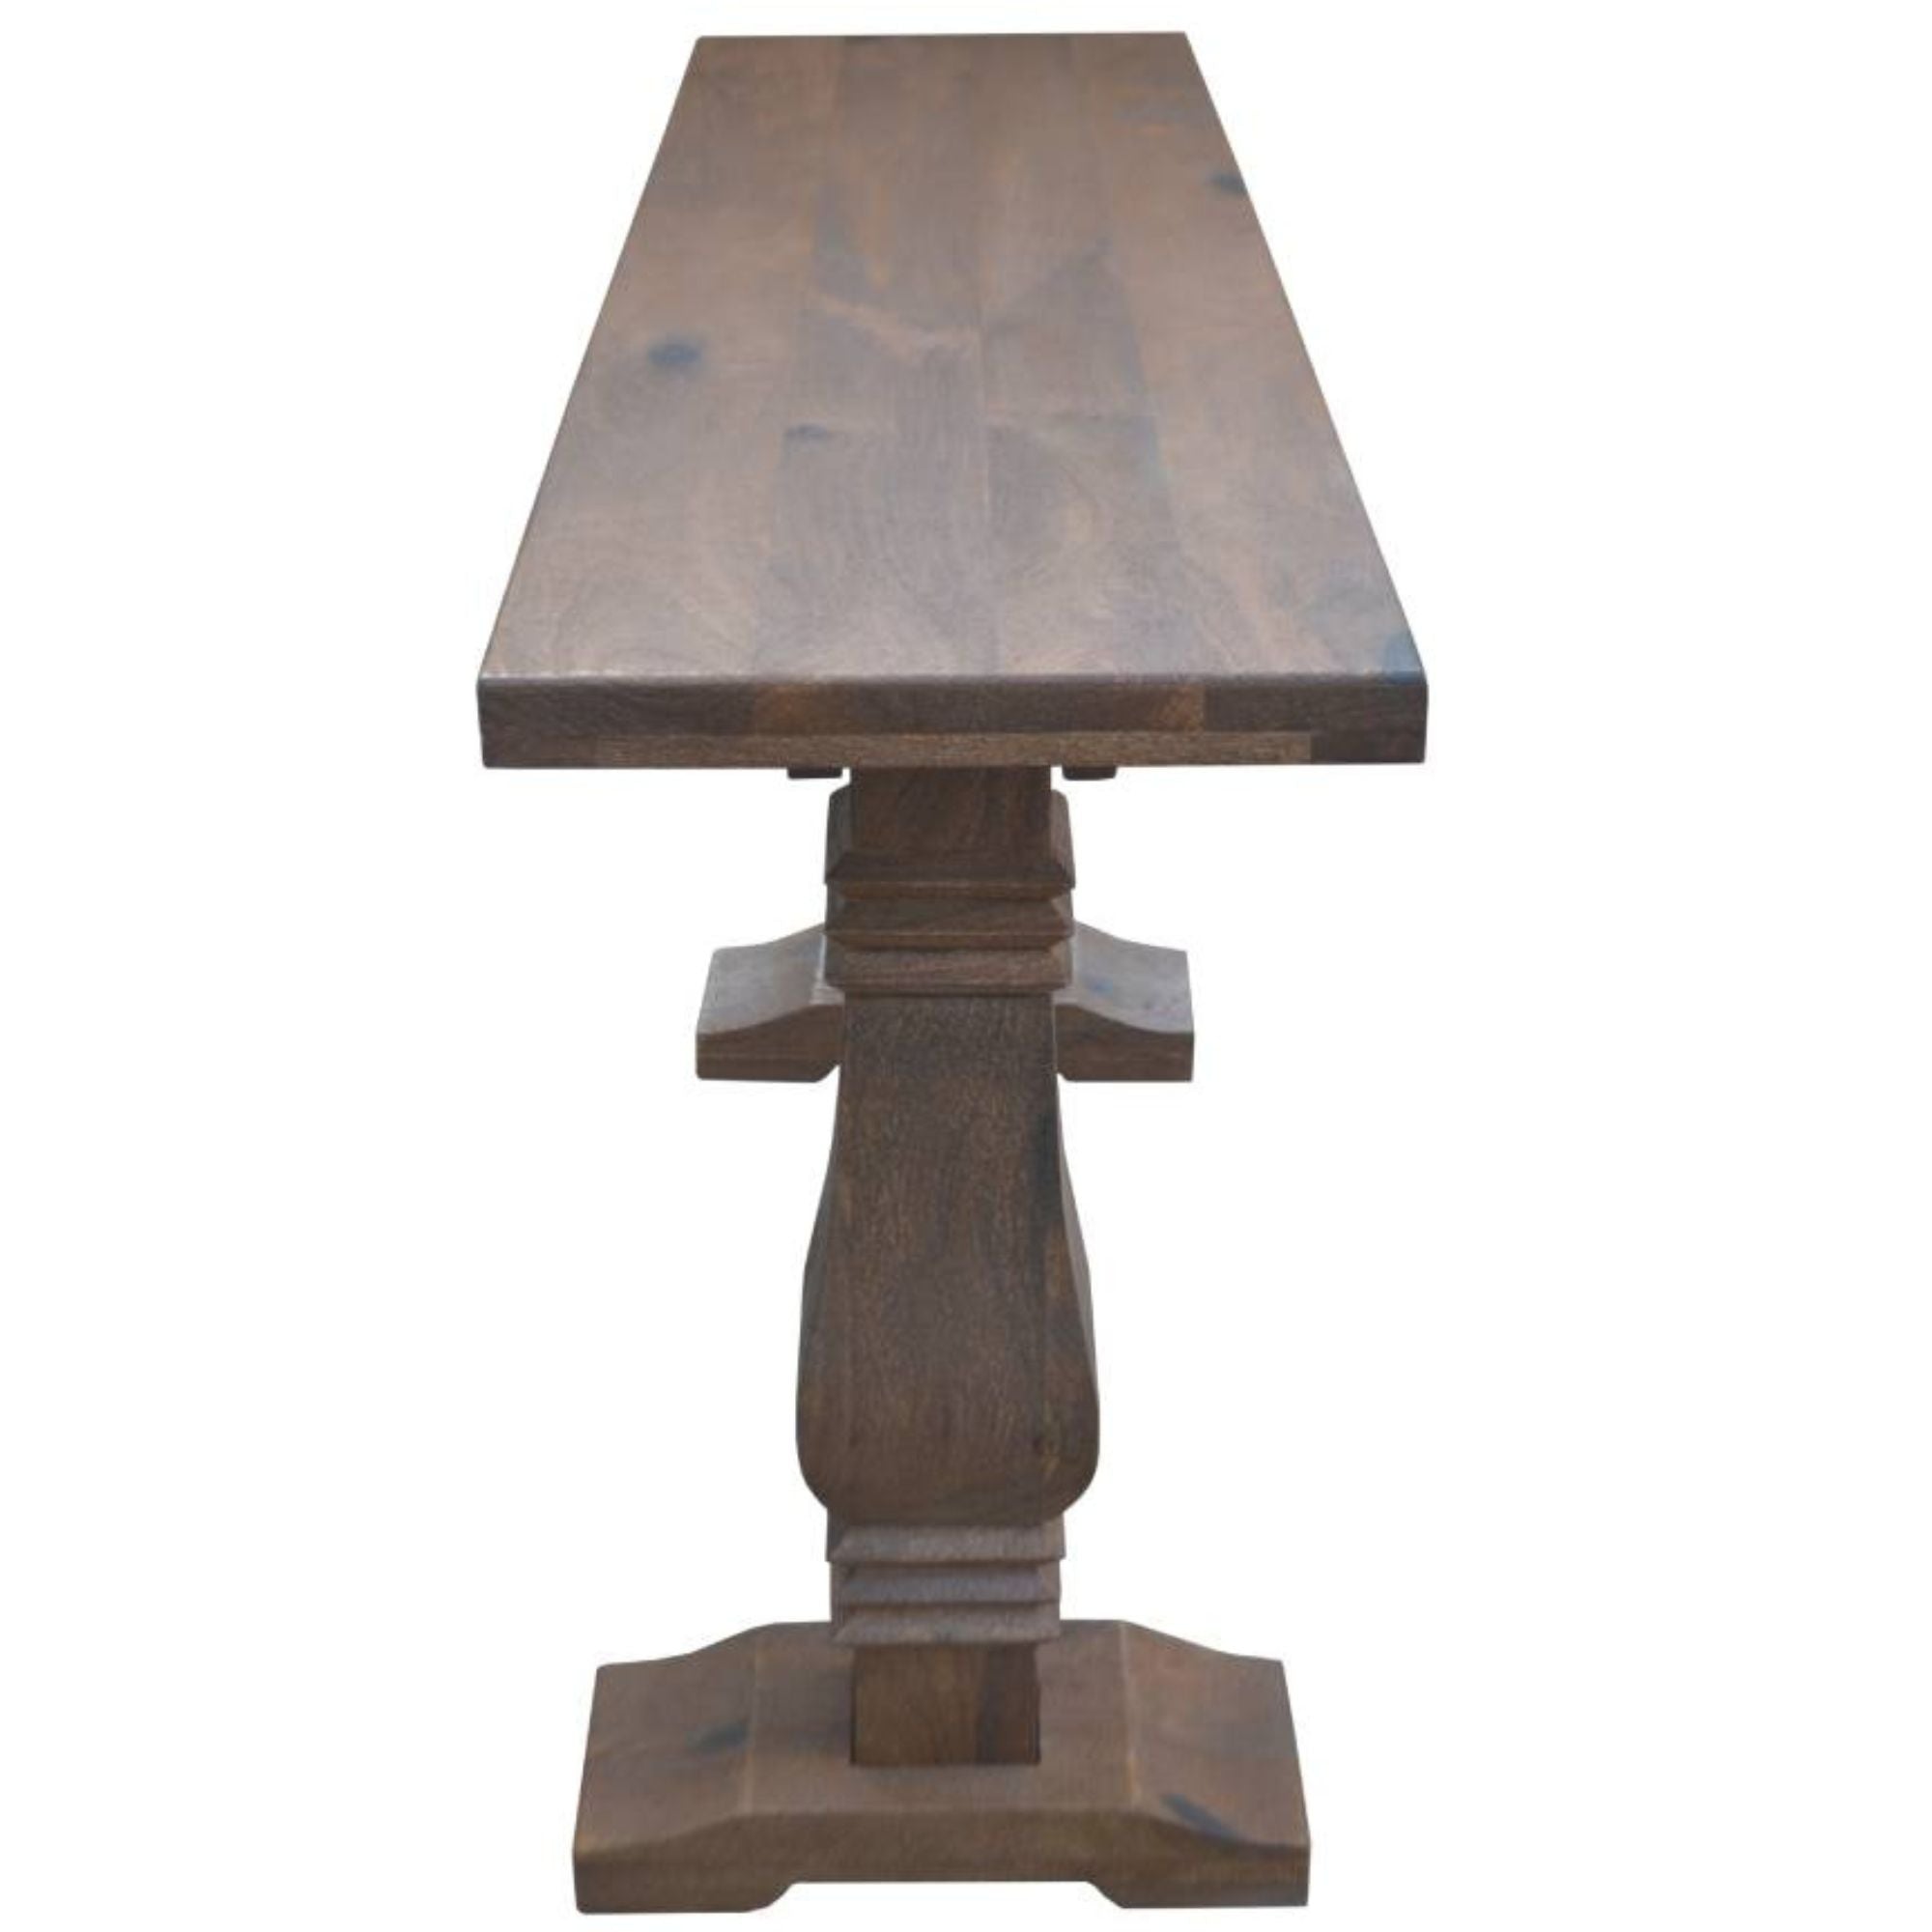 Console Hall Entrance Table 160Cm Pedestal Timber French Provincial